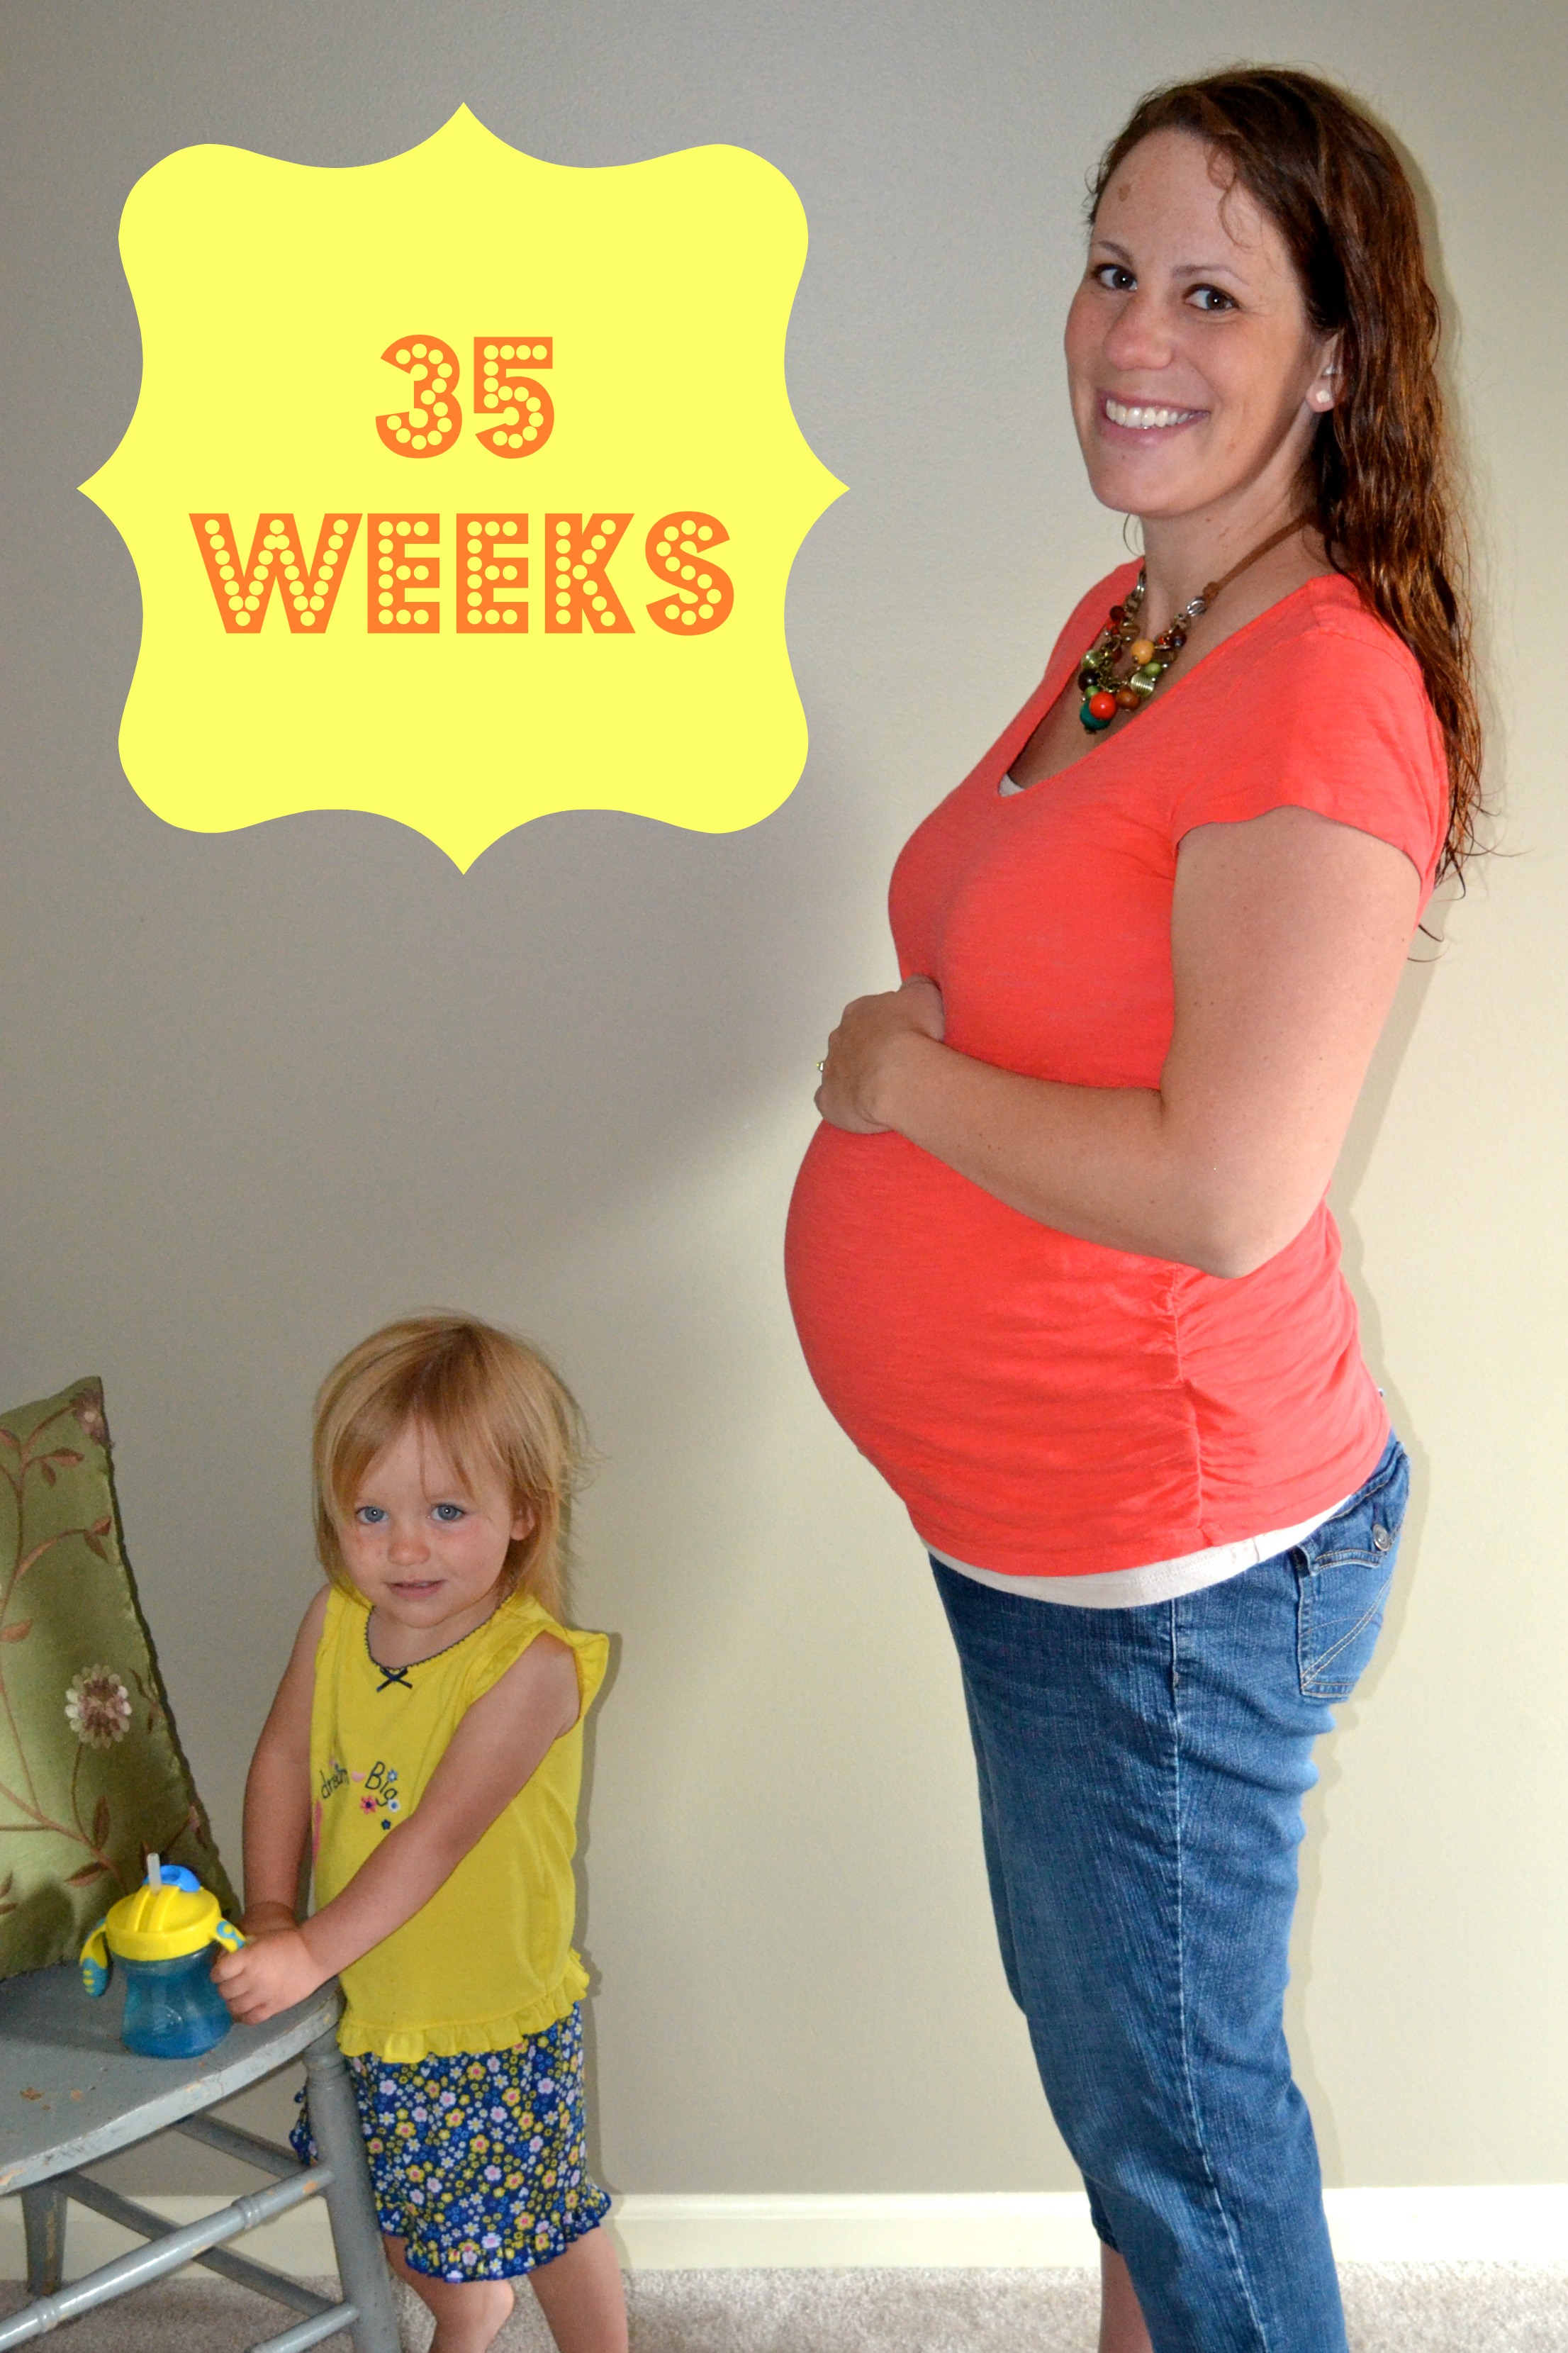 35 Weeks Pregnant Baby Development: A Peek Into Your Little One’s Growth